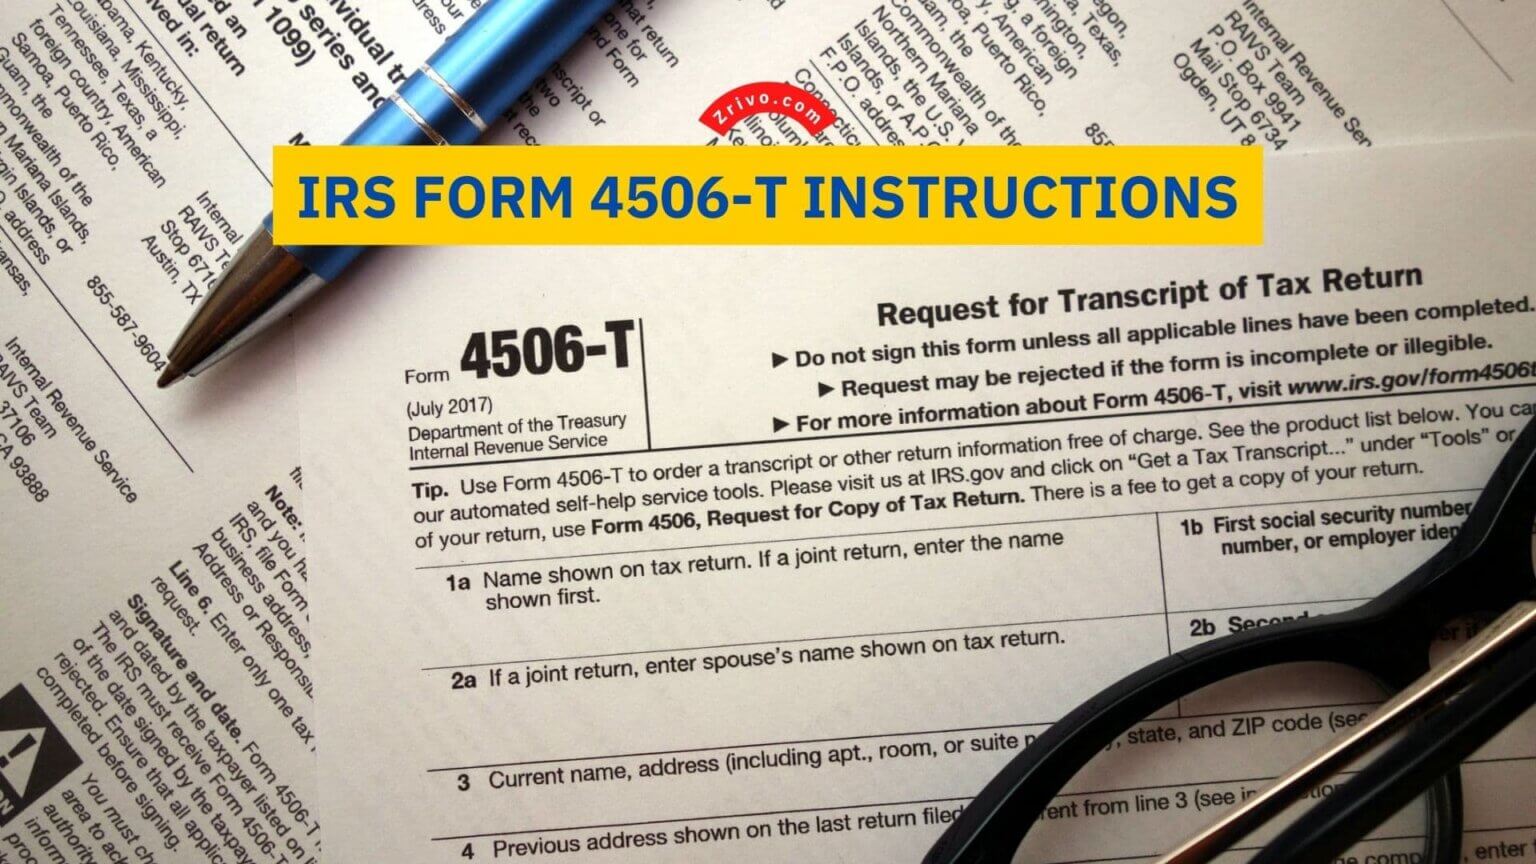 irs-form-4506-t-instructions-2022-2023